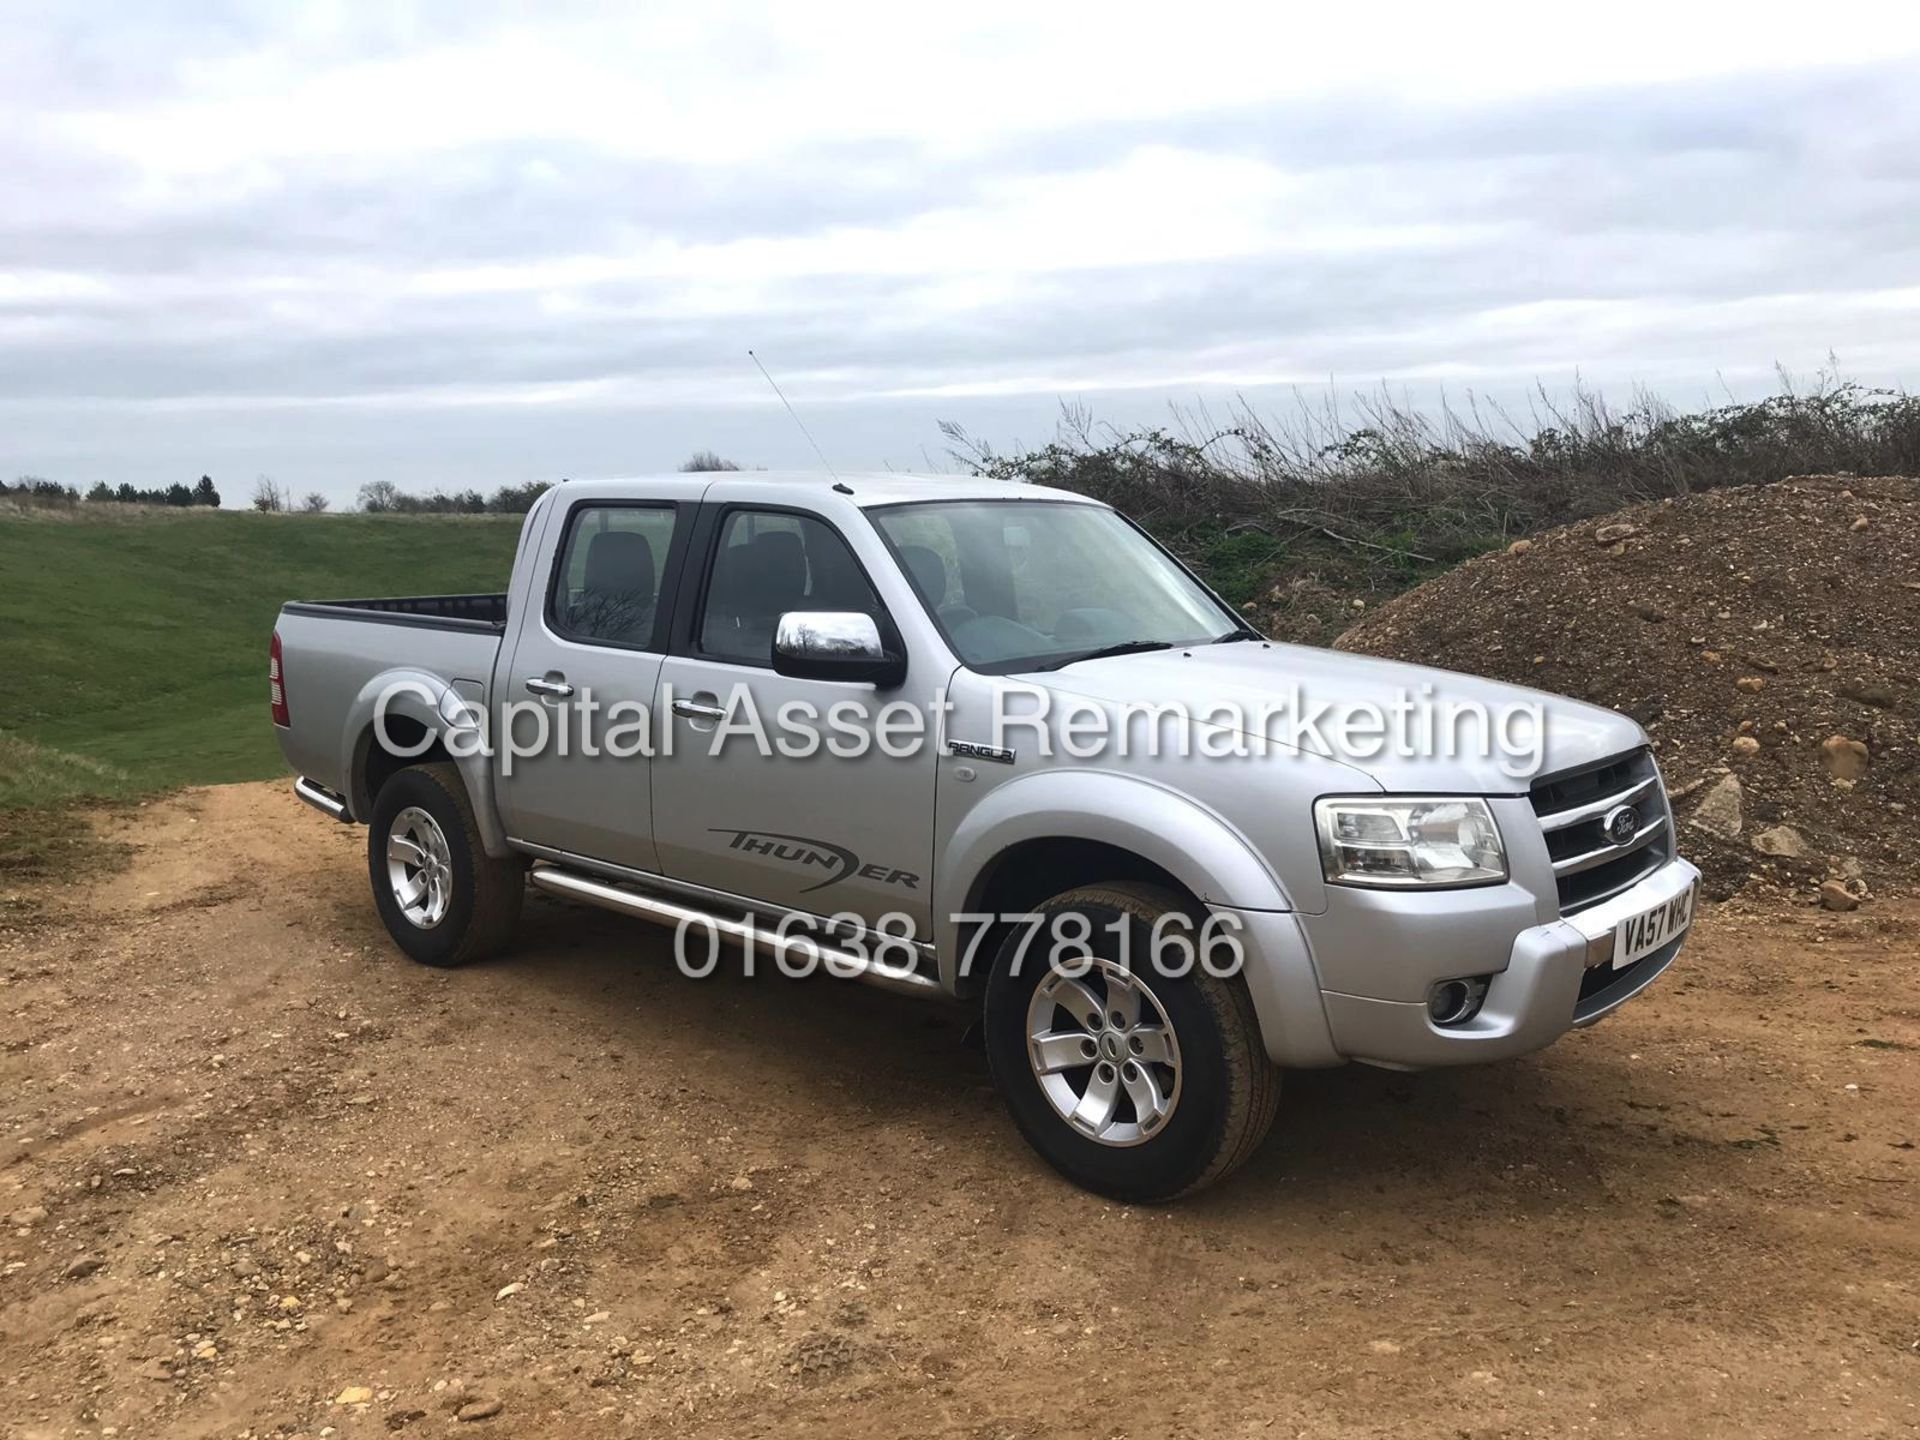 FORD RANGER 2.5TDCI "THUNDER / 143BHP" 4 DR / DOUBLE CAB (2008 MODEL) LEATHER - AIR CON - ELEC PACK